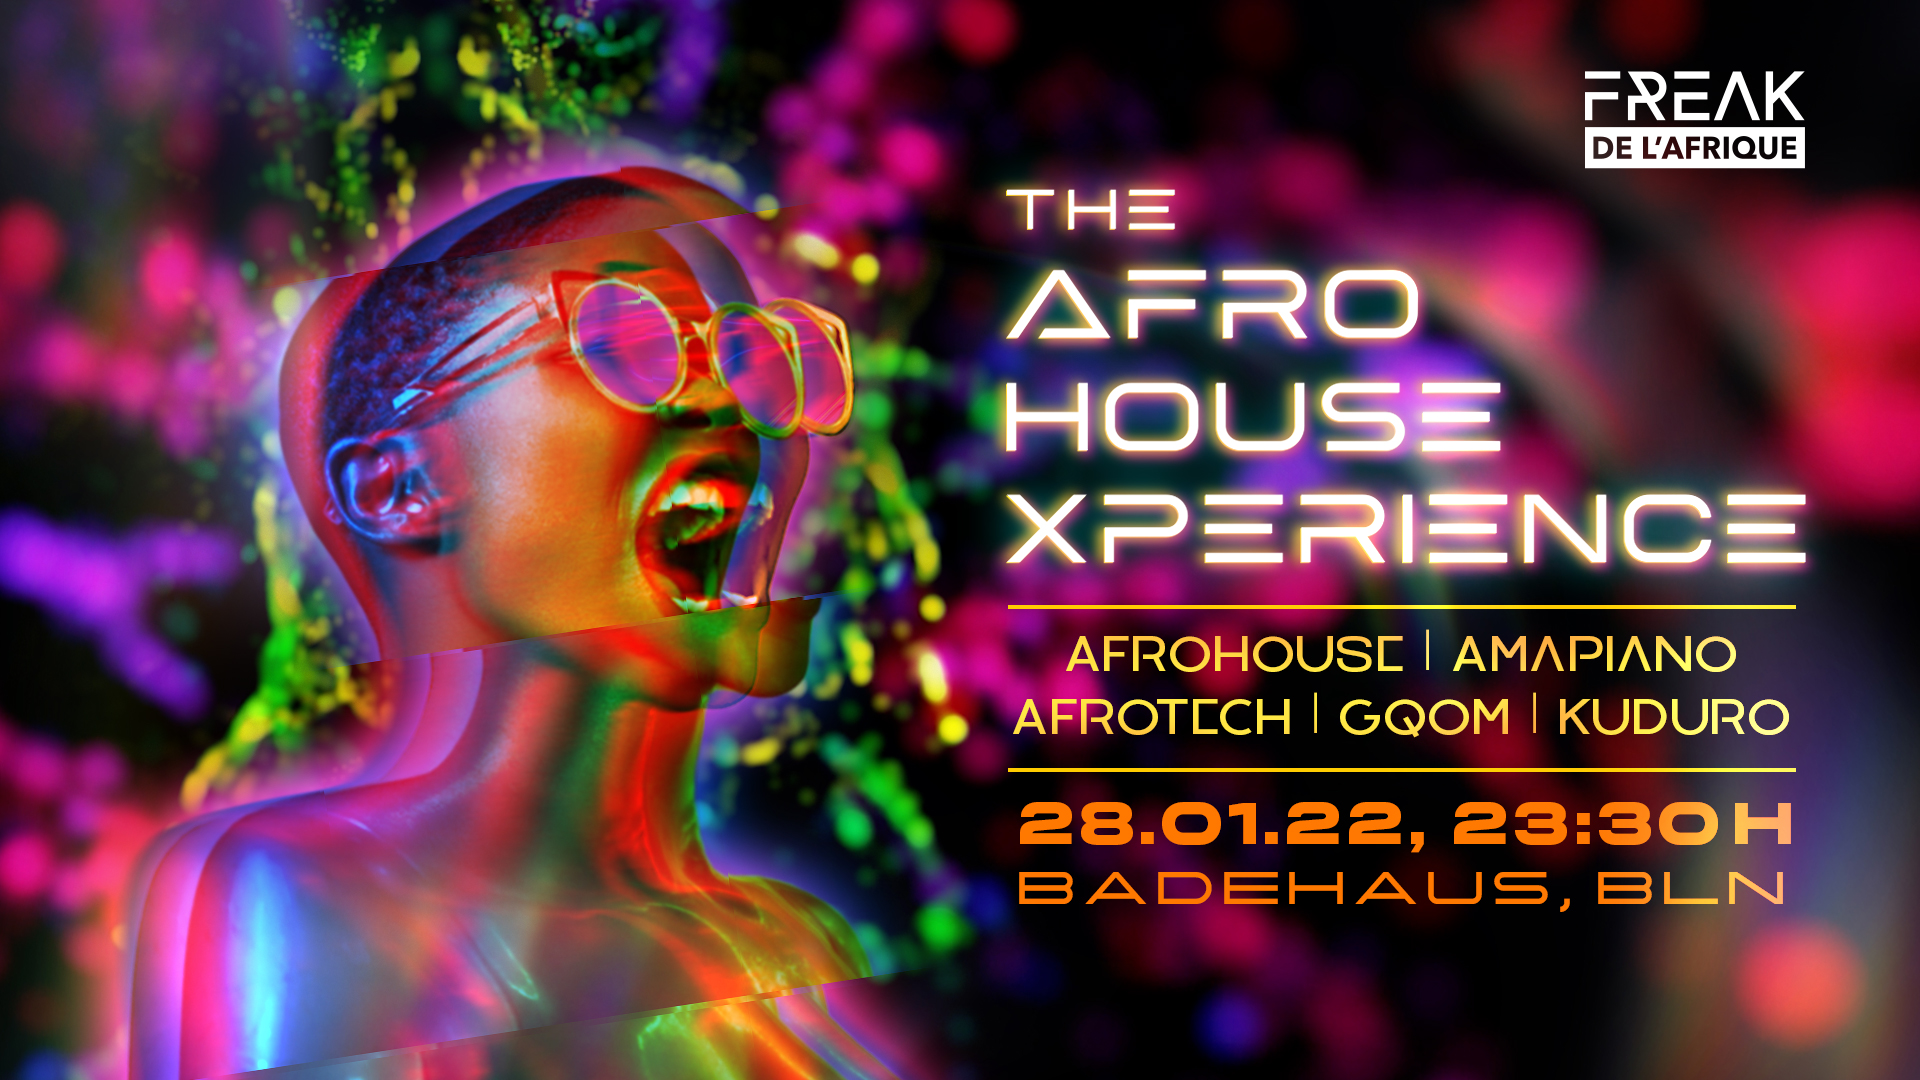 The Afrohouse Xperience